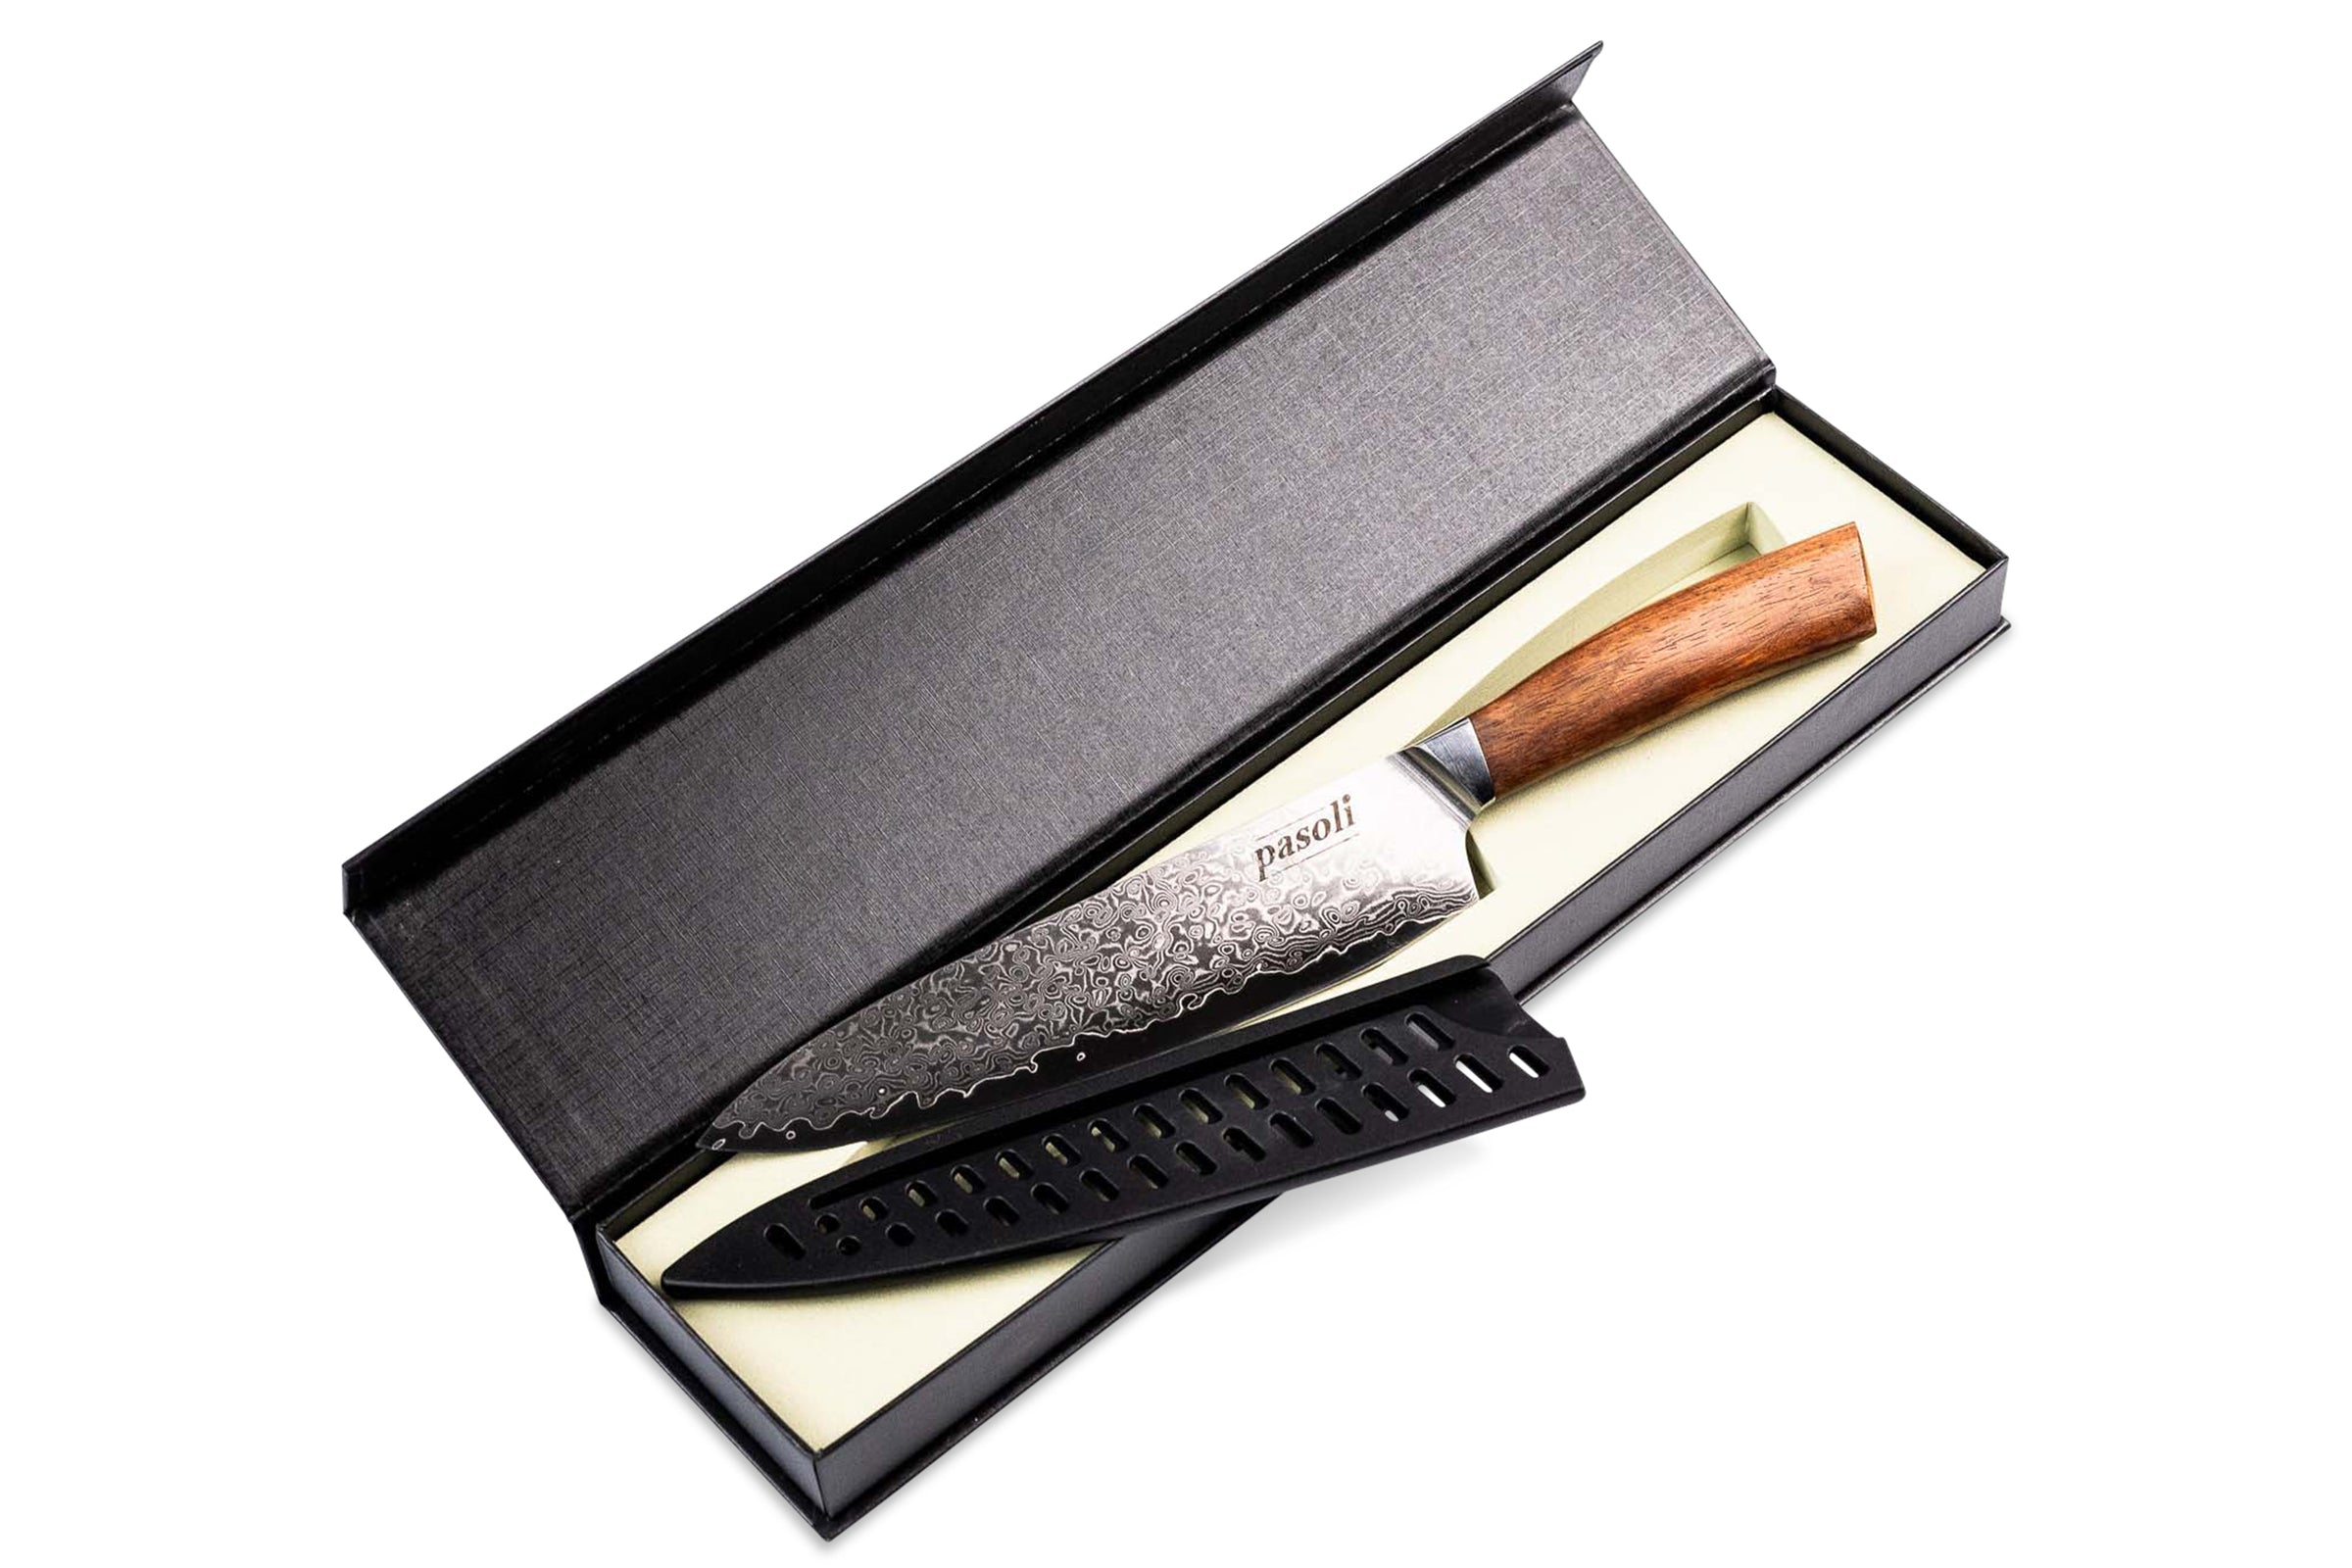 pasoli damask chef's knife in elegant gift packaging including blade protection.